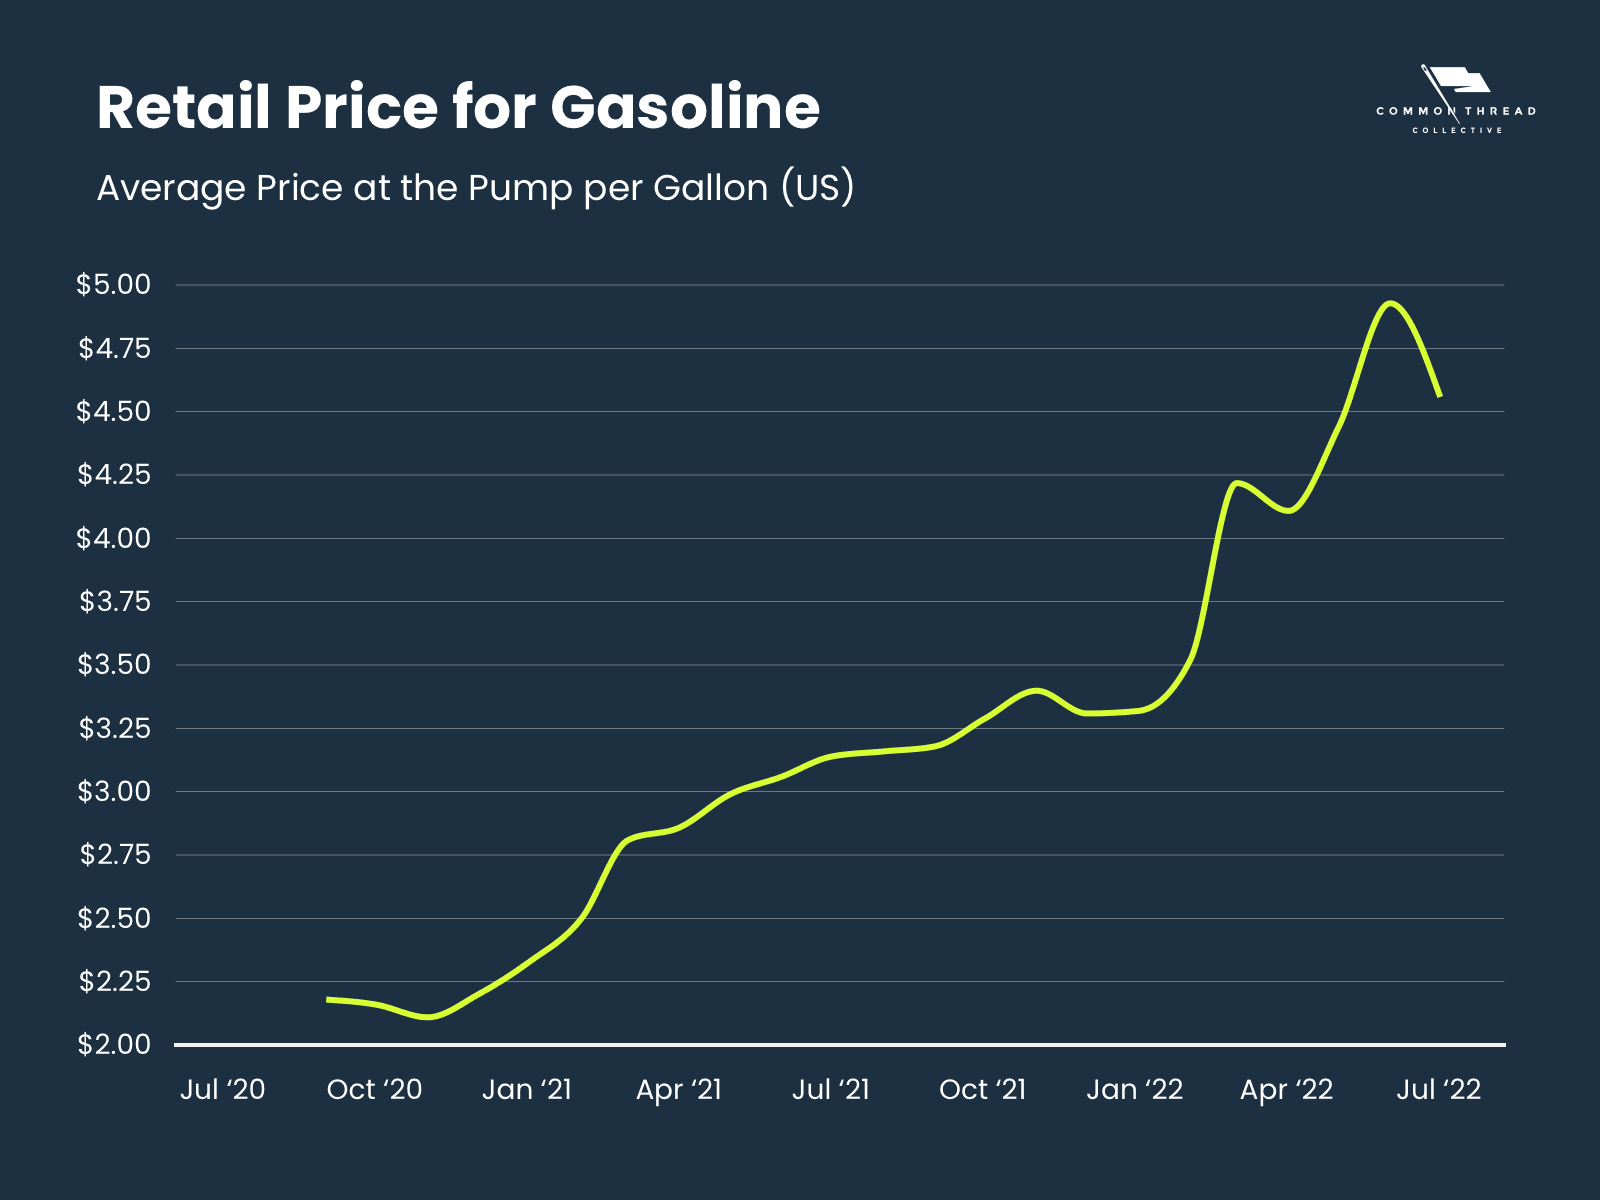 average retail price of gasoline from July 2020 - July 2022